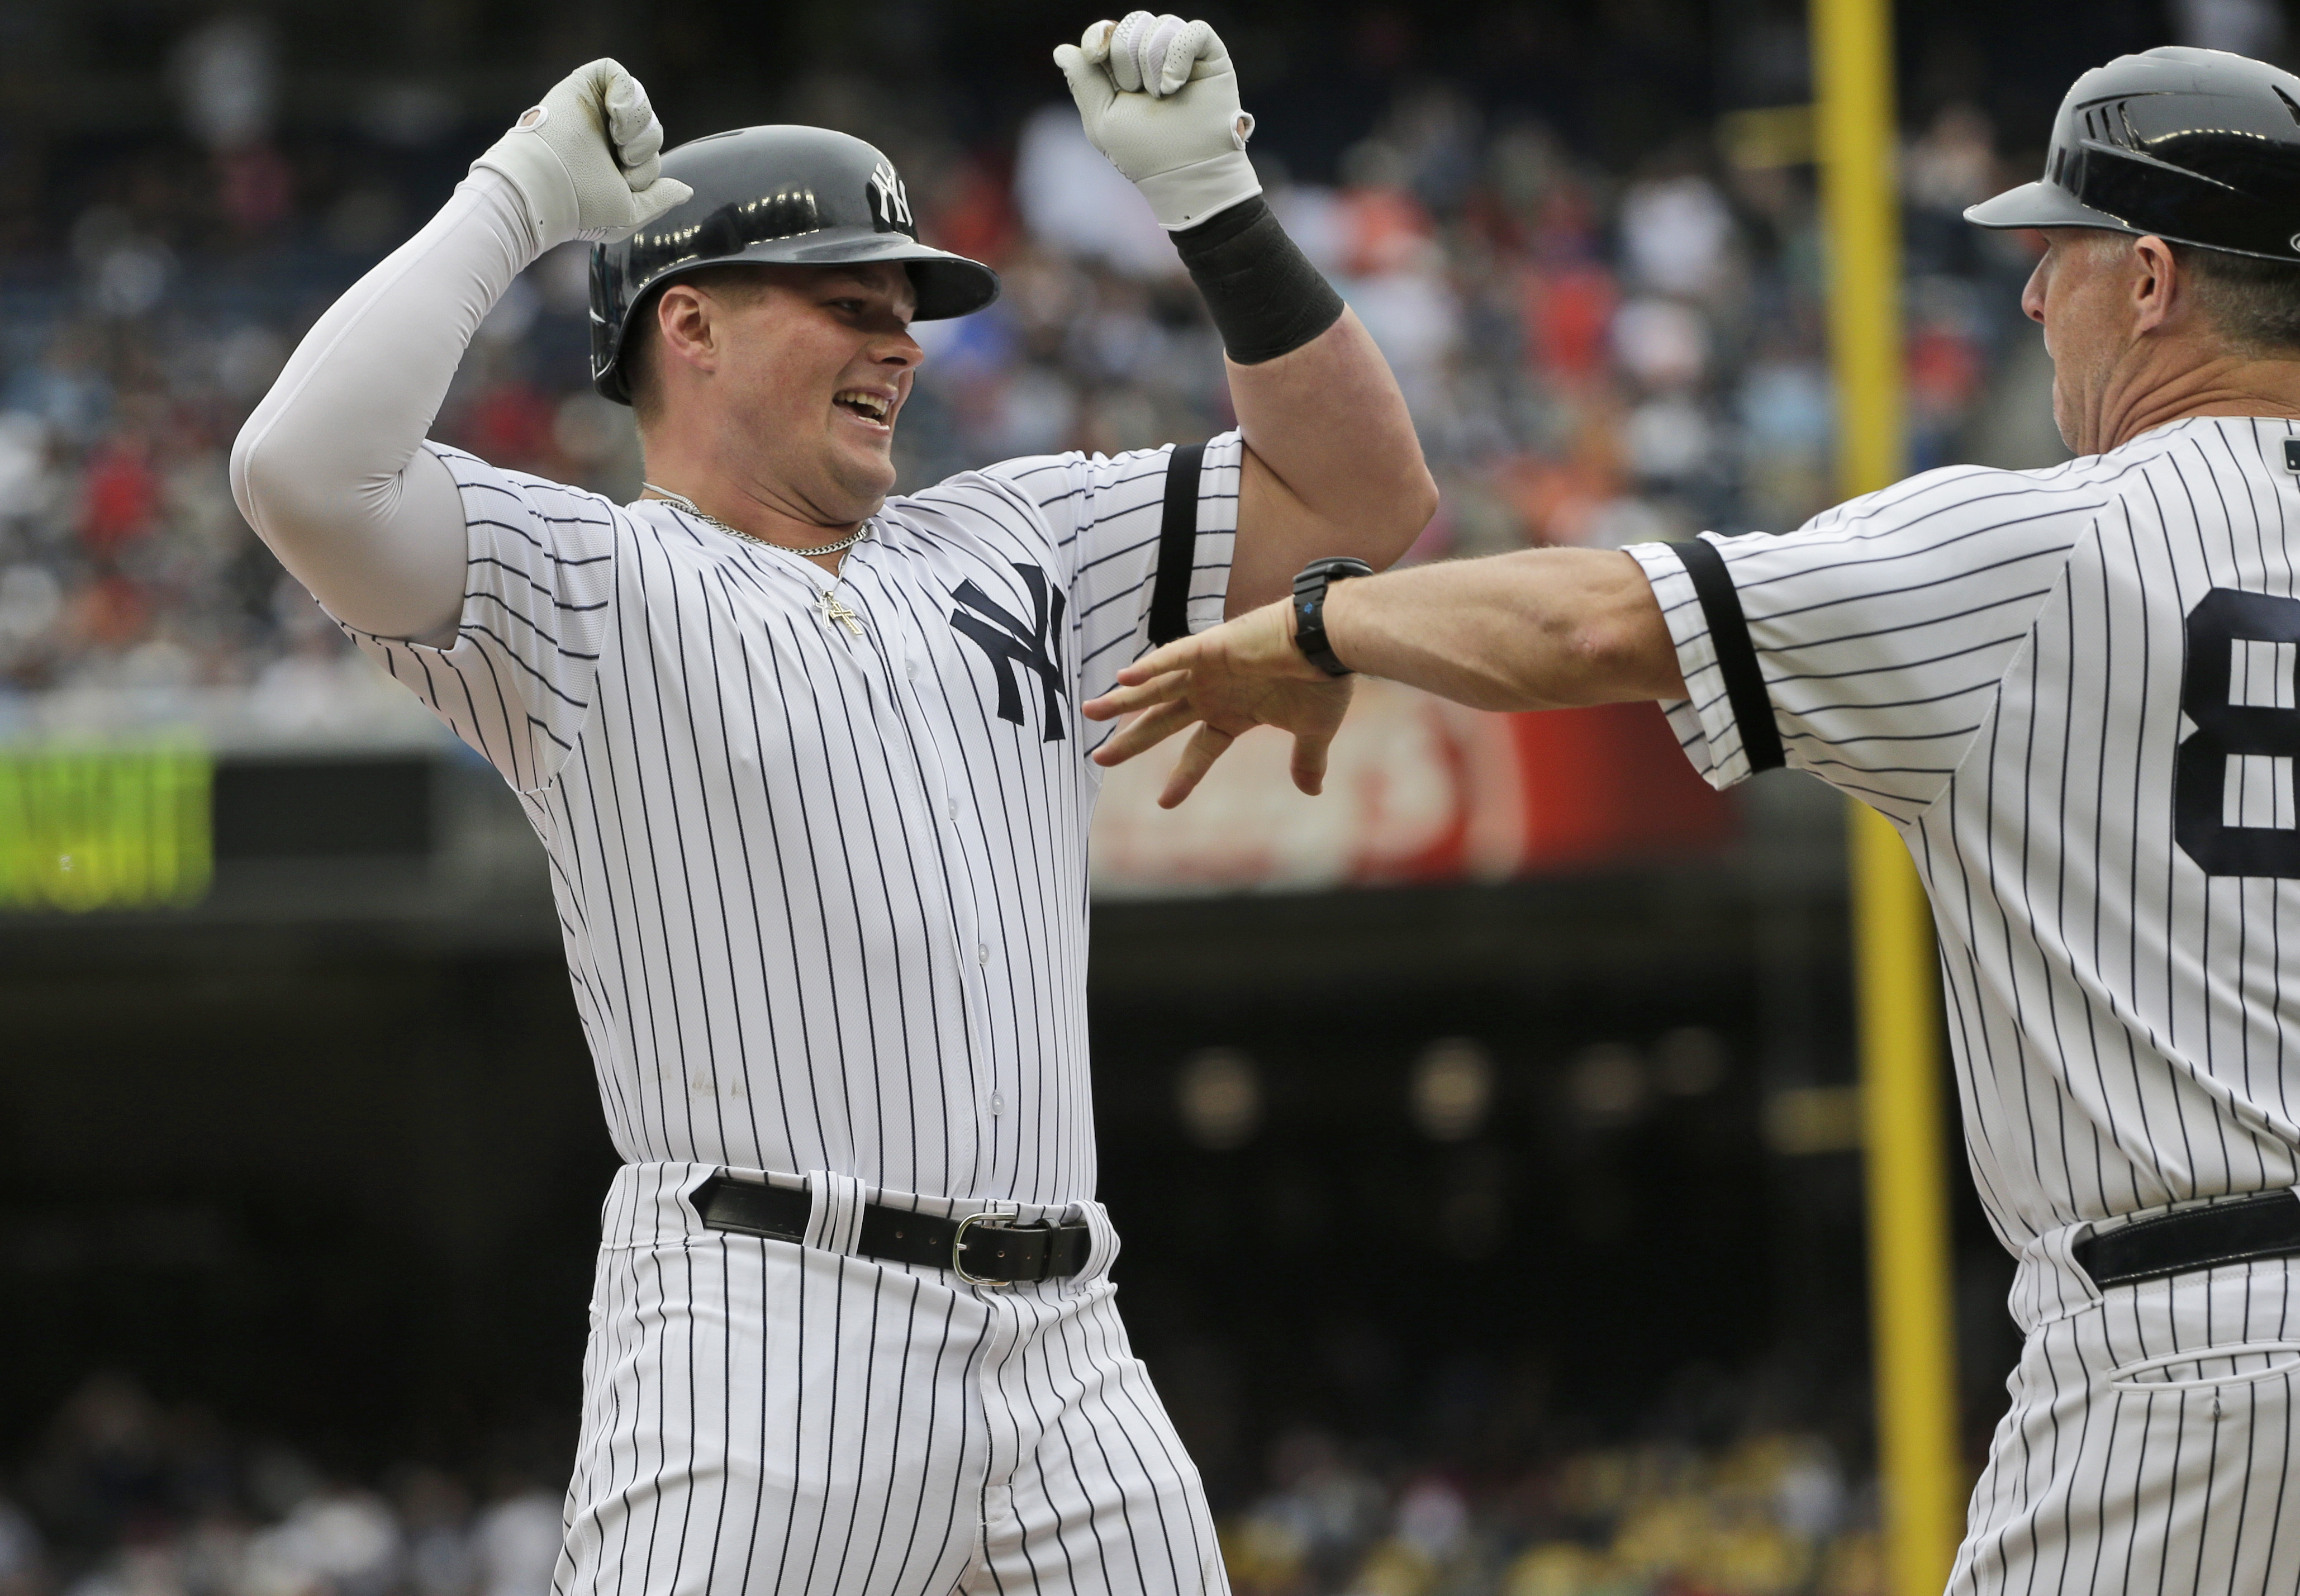 Yankees HRs jolt Paddack, Paxton fine in 7-0 win over Padres